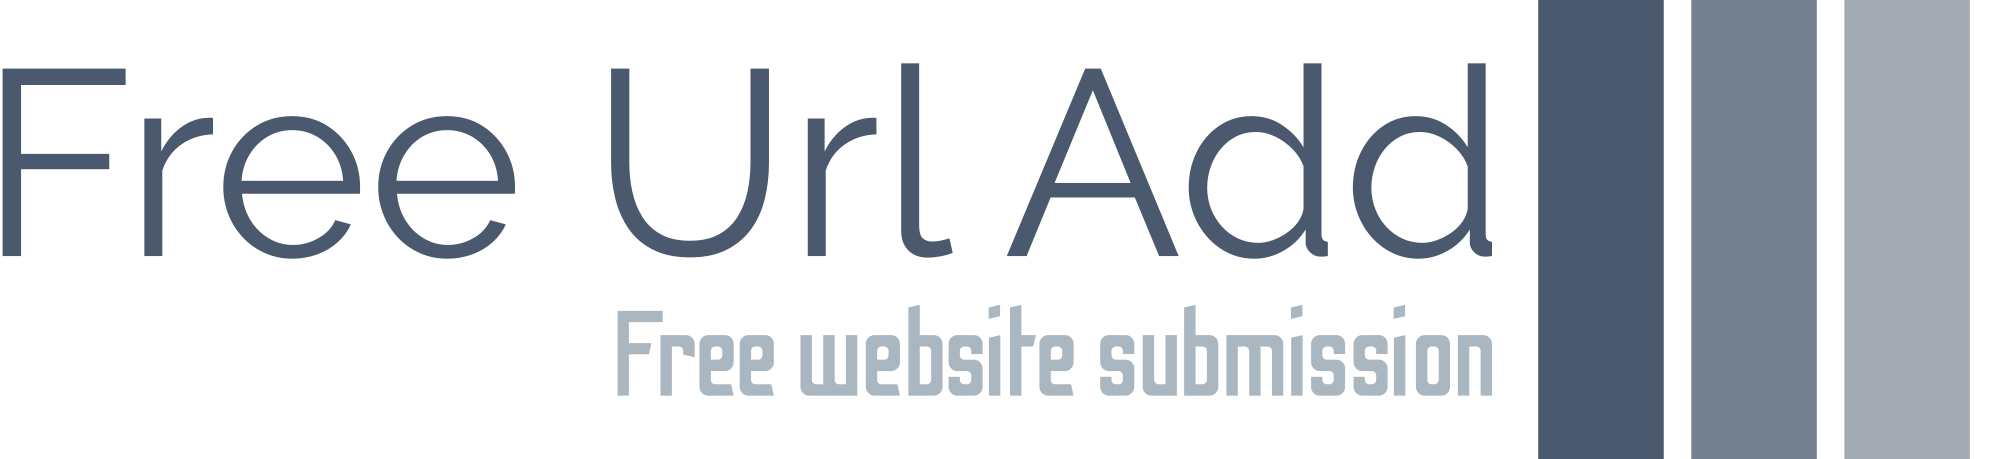 Free Url Add | Free Directory Submission